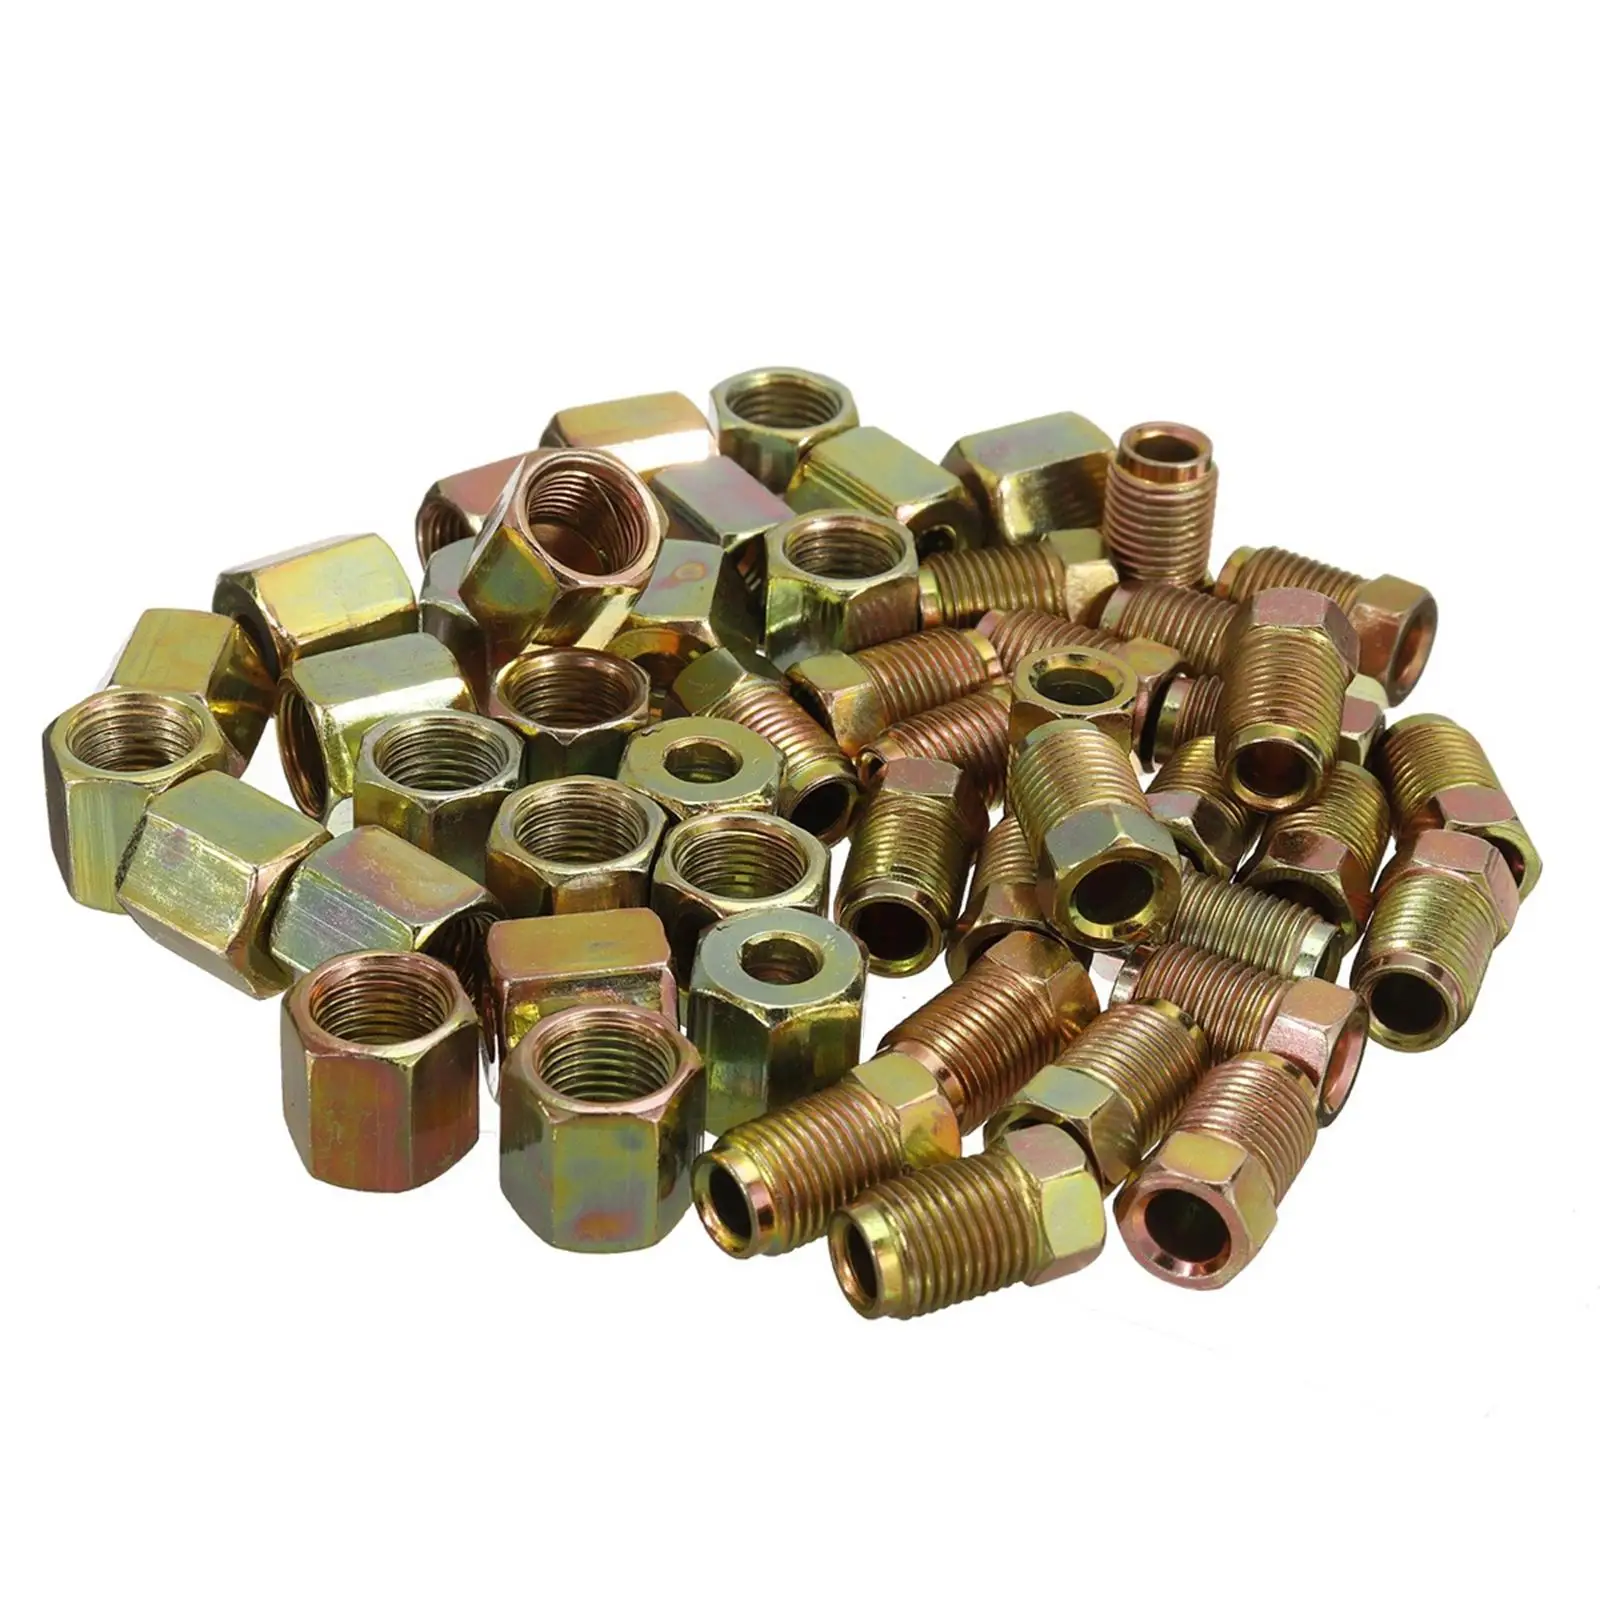 50x Galvanized Iron Brake Pipe Fittings 10x1mm Male & Female Metric Nuts Adapter for 3/16 Tube Replaces Parts Accs